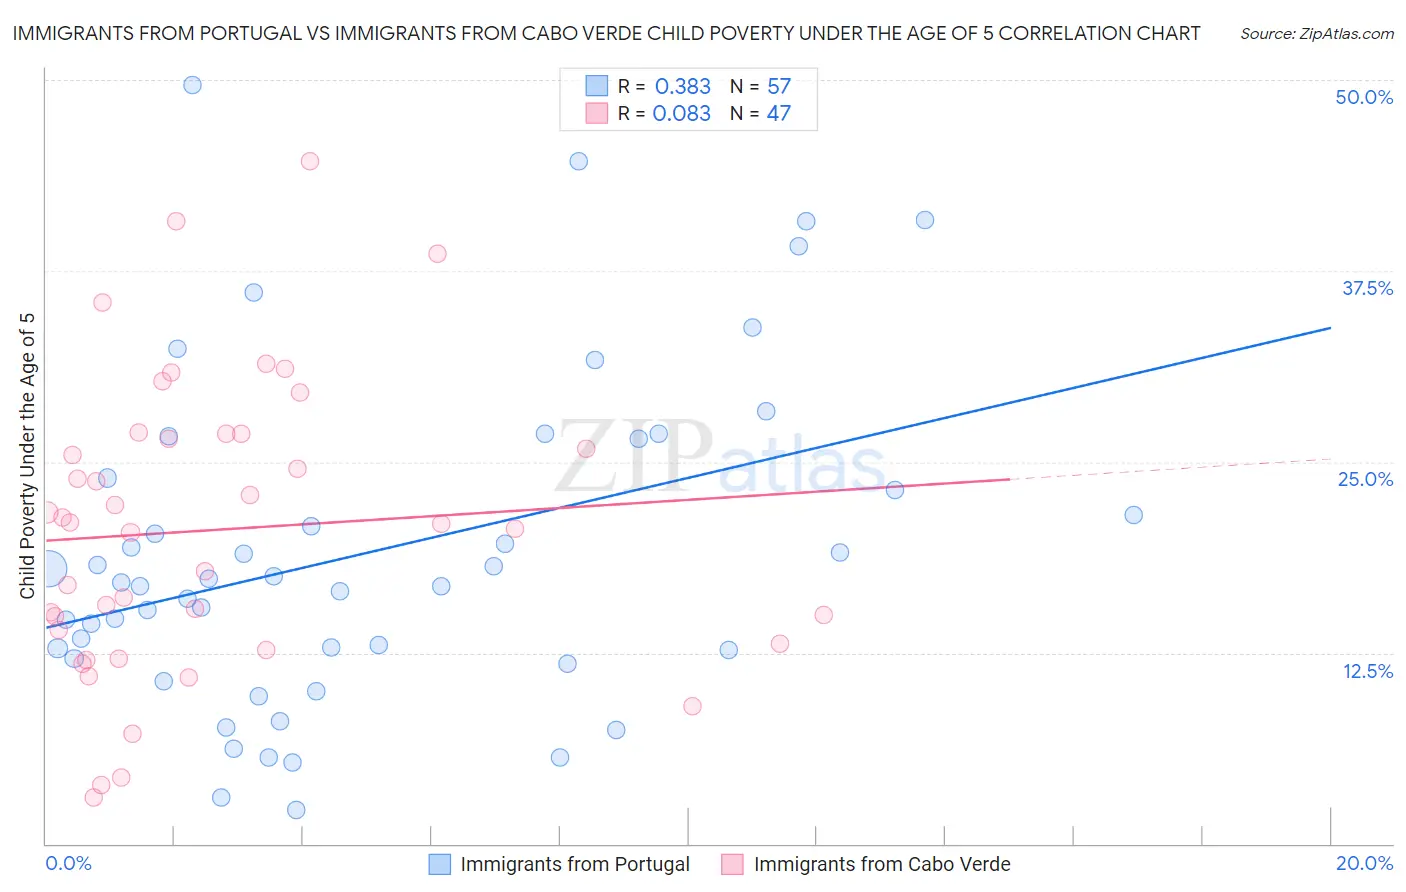 Immigrants from Portugal vs Immigrants from Cabo Verde Child Poverty Under the Age of 5